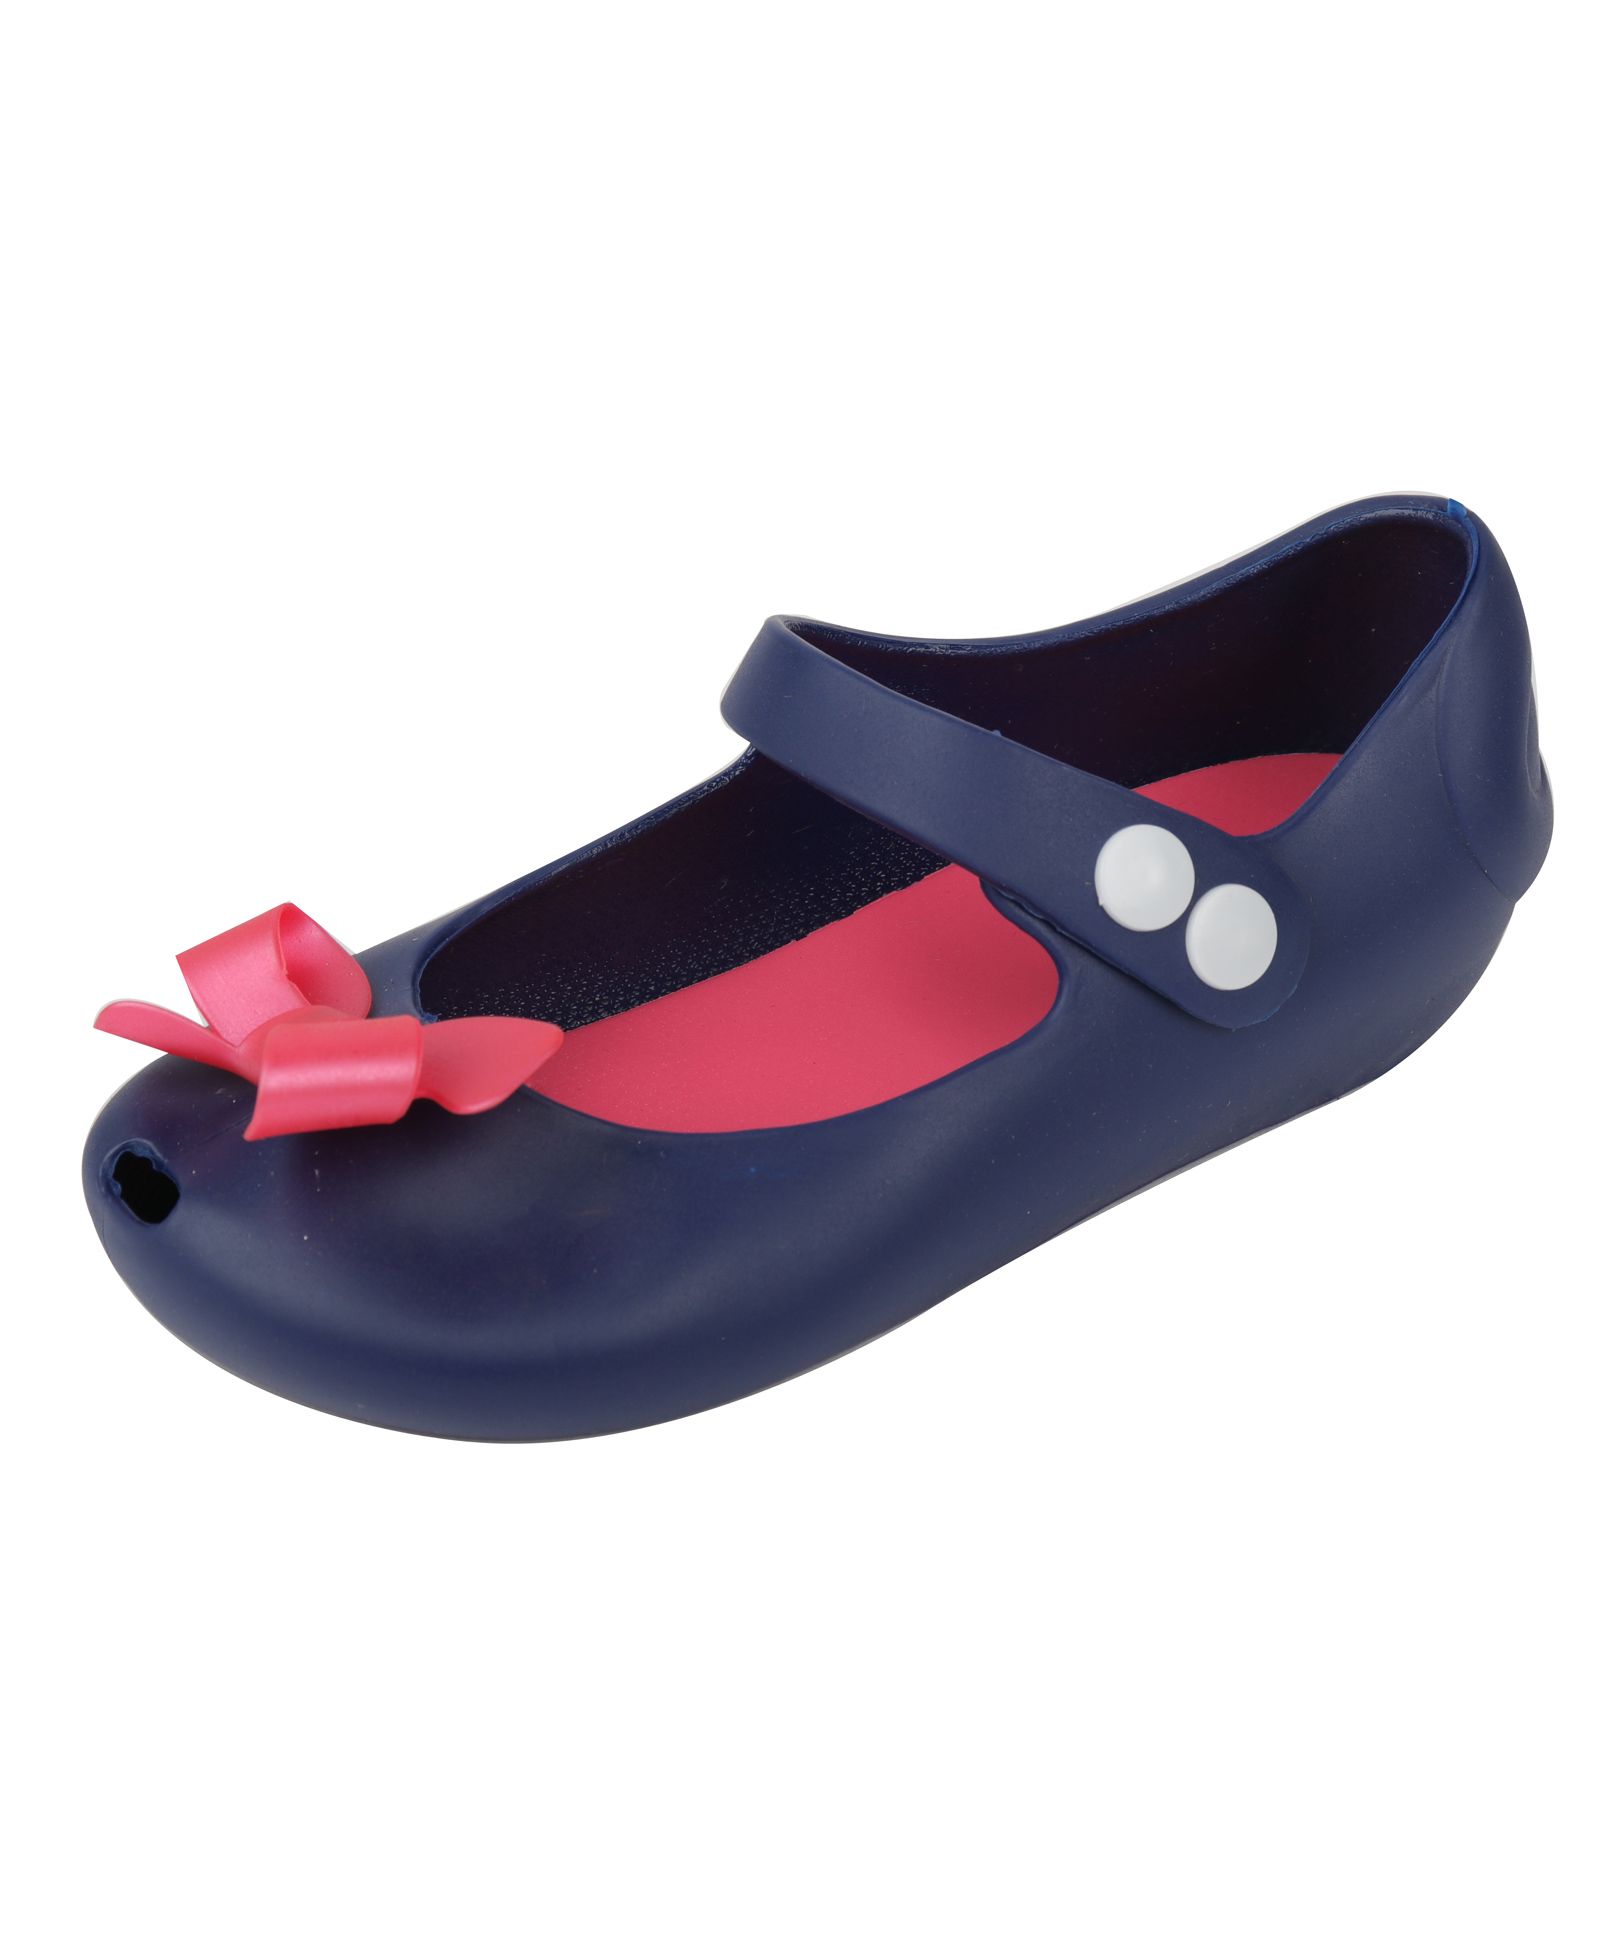 jelly jane shoes